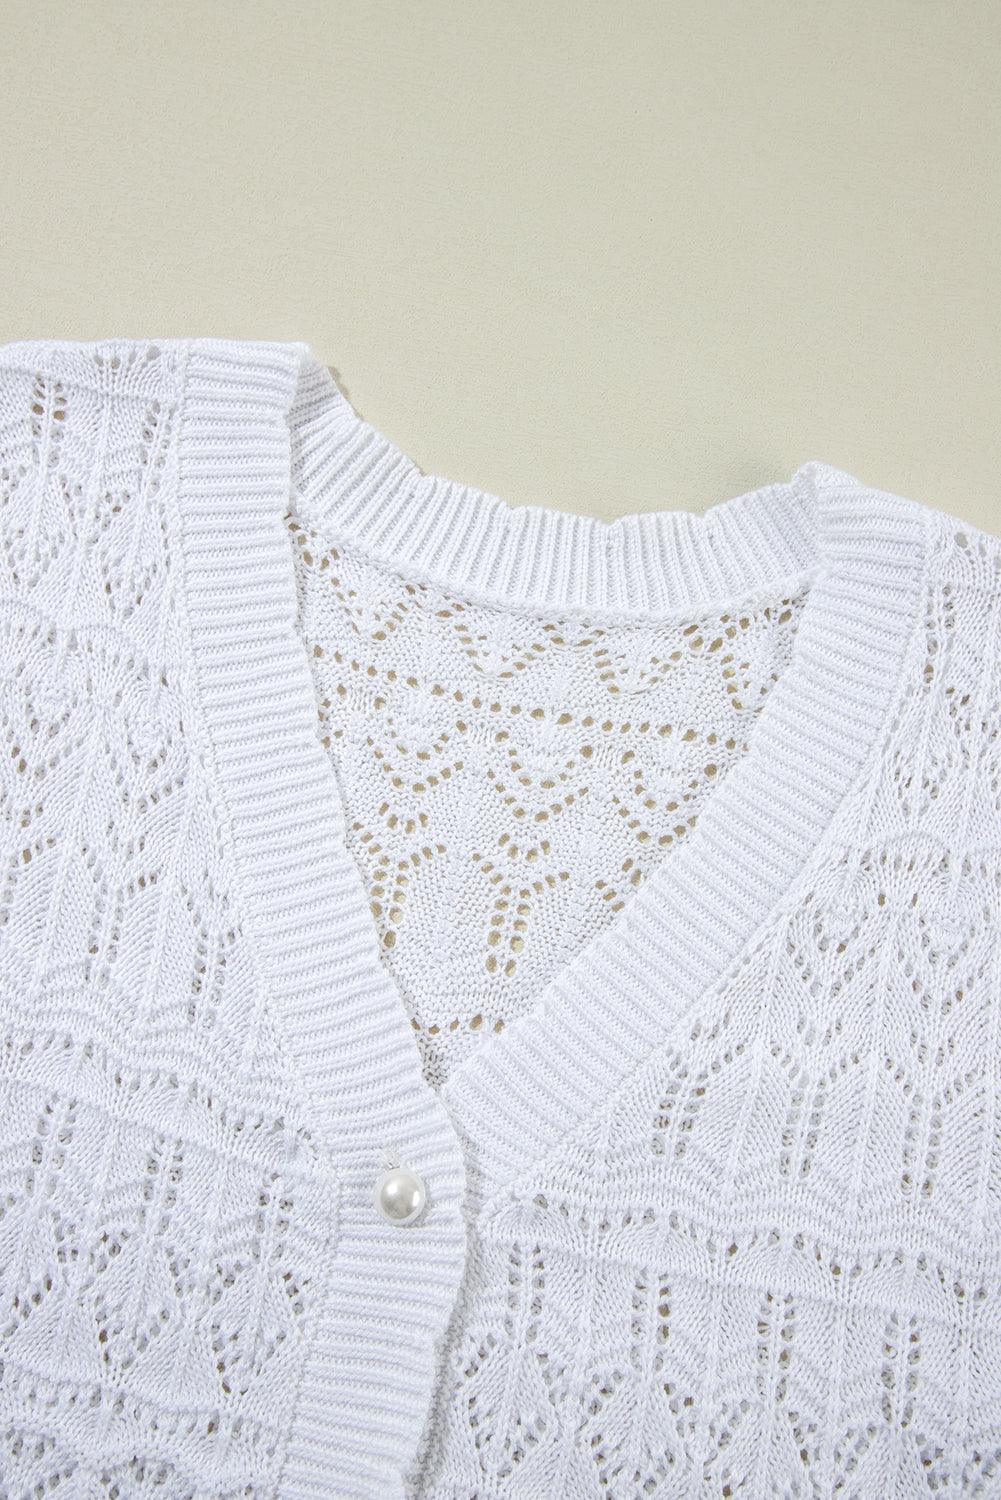 White Frenchy Hollow Out Knitted V Neck Cardigan - L & M Kee, LLC